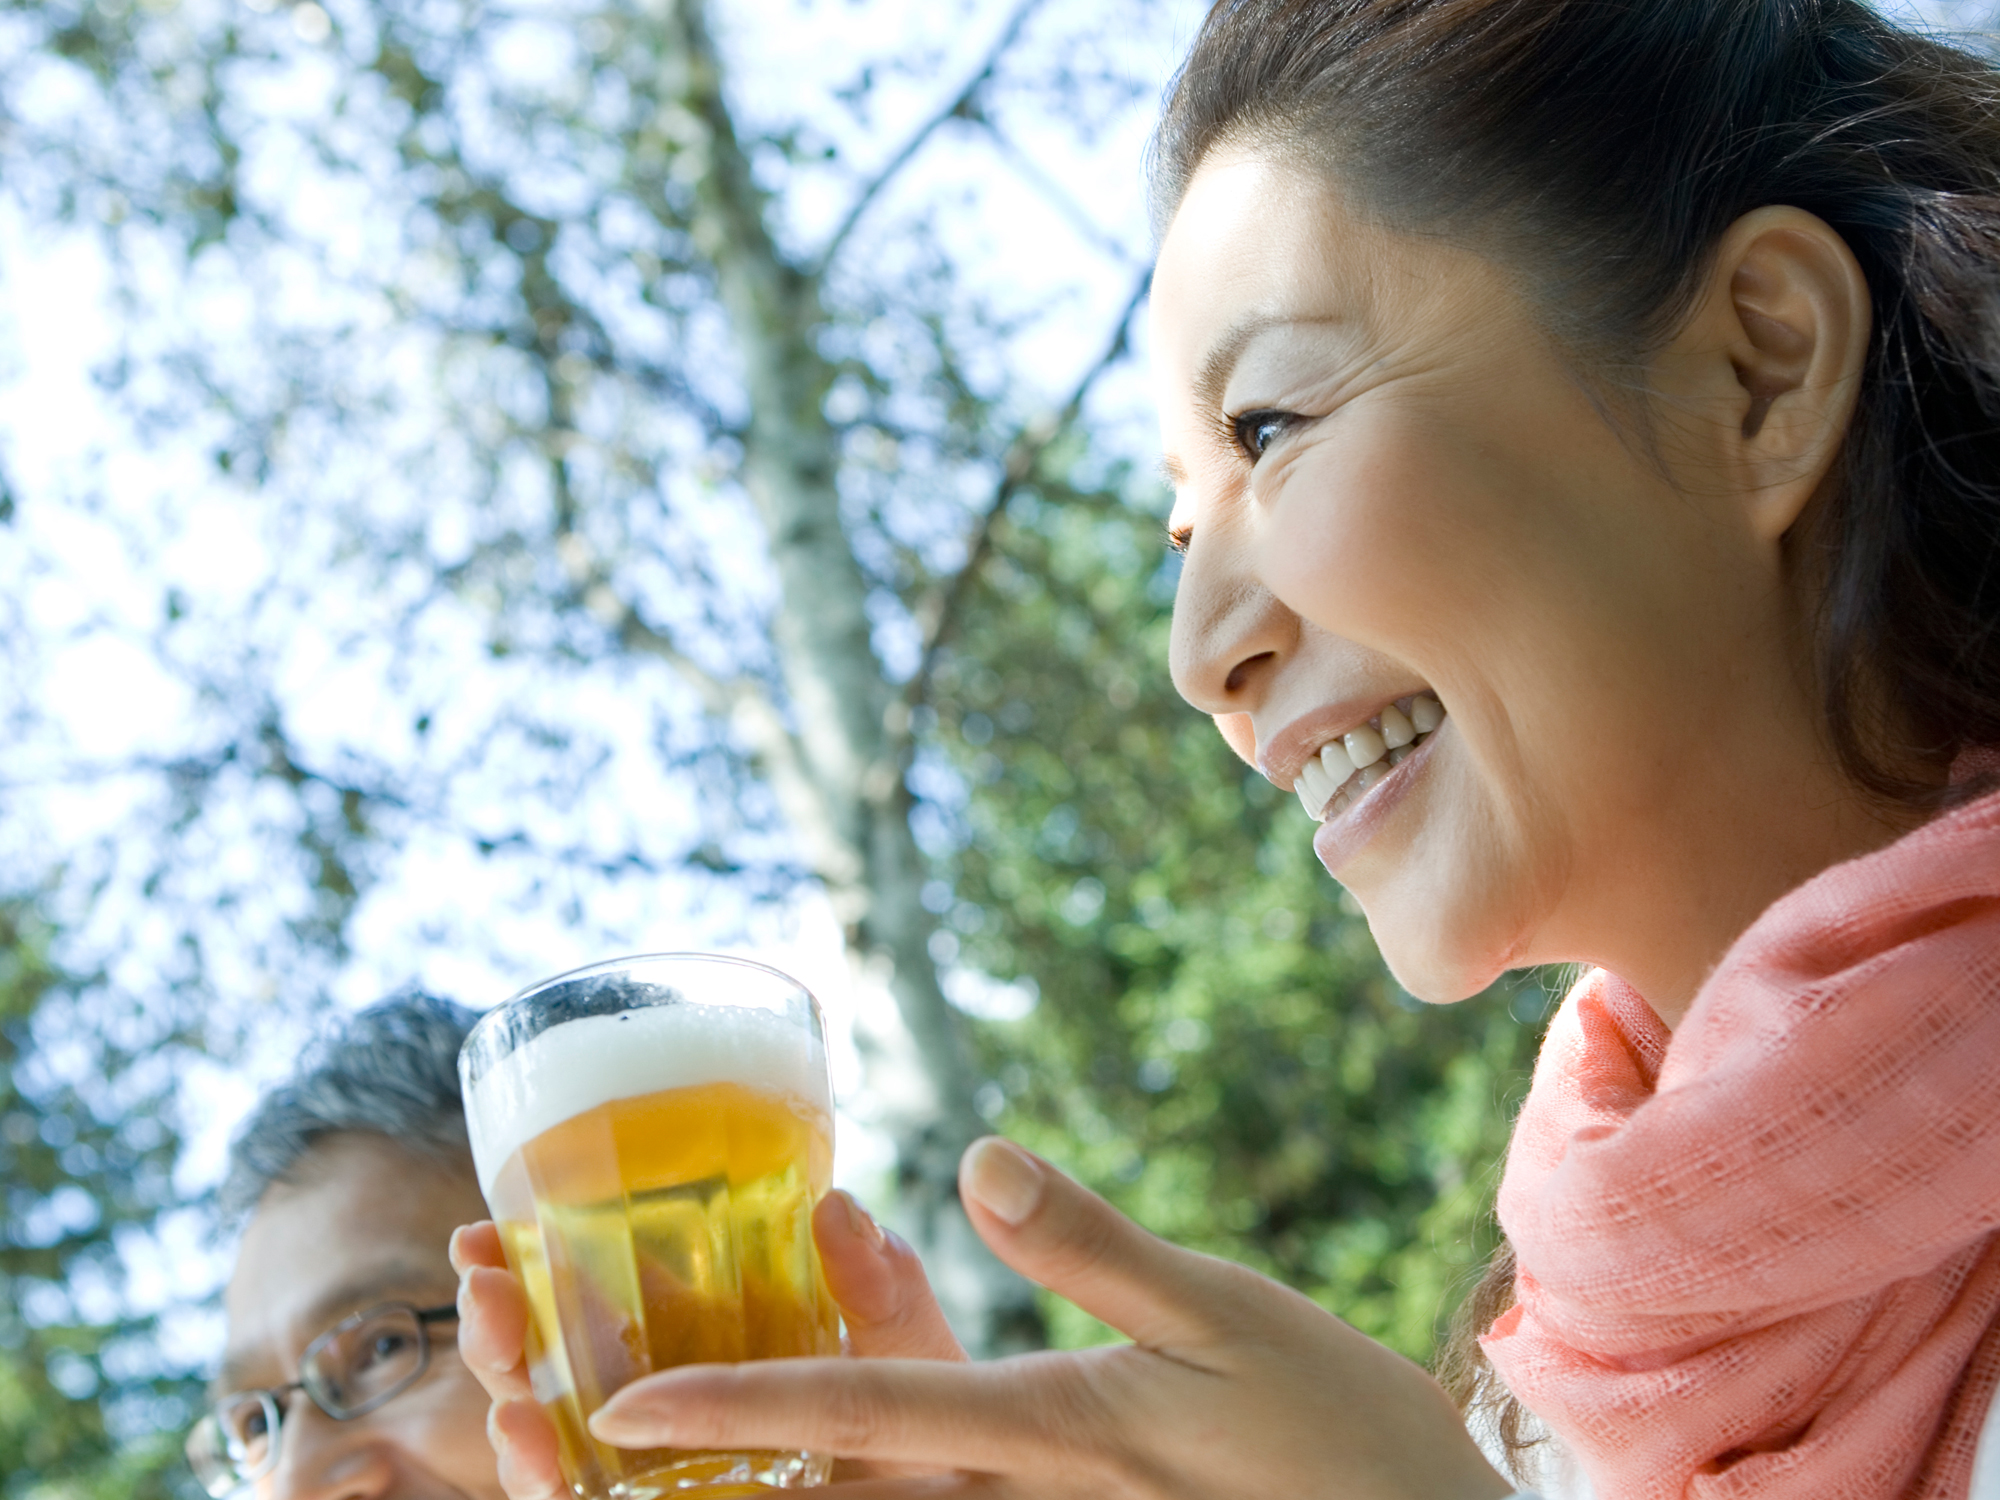 Hops help for cancer and hot flashes